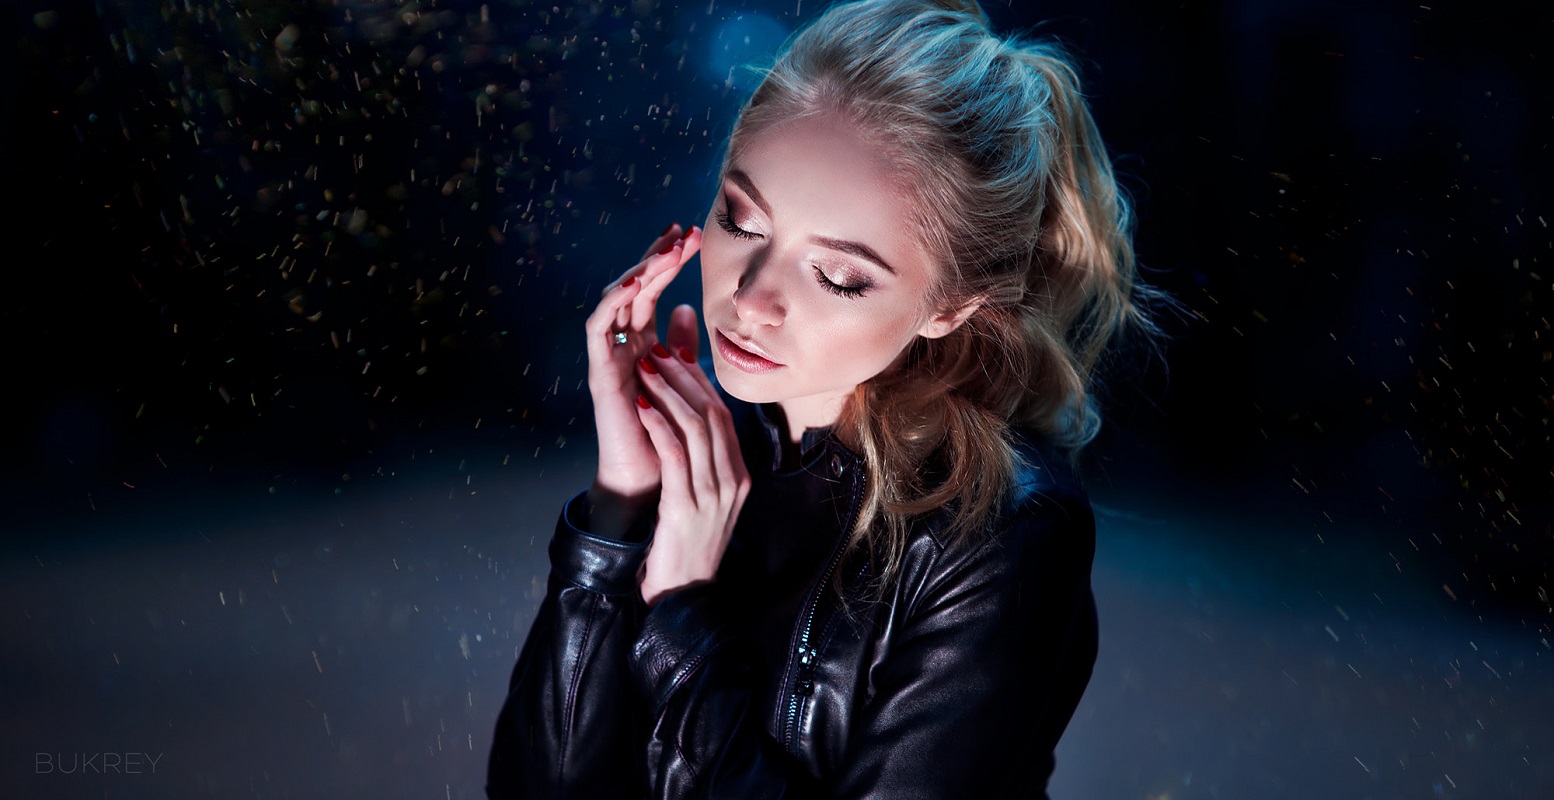 People 1554x800 women model Oksana Kirill Bukrey tied hair leather jacket jacket black jackets portrait black clothing makeup closed eyes red nails painted nails leather clothing zipper blonde young women low light watermarked